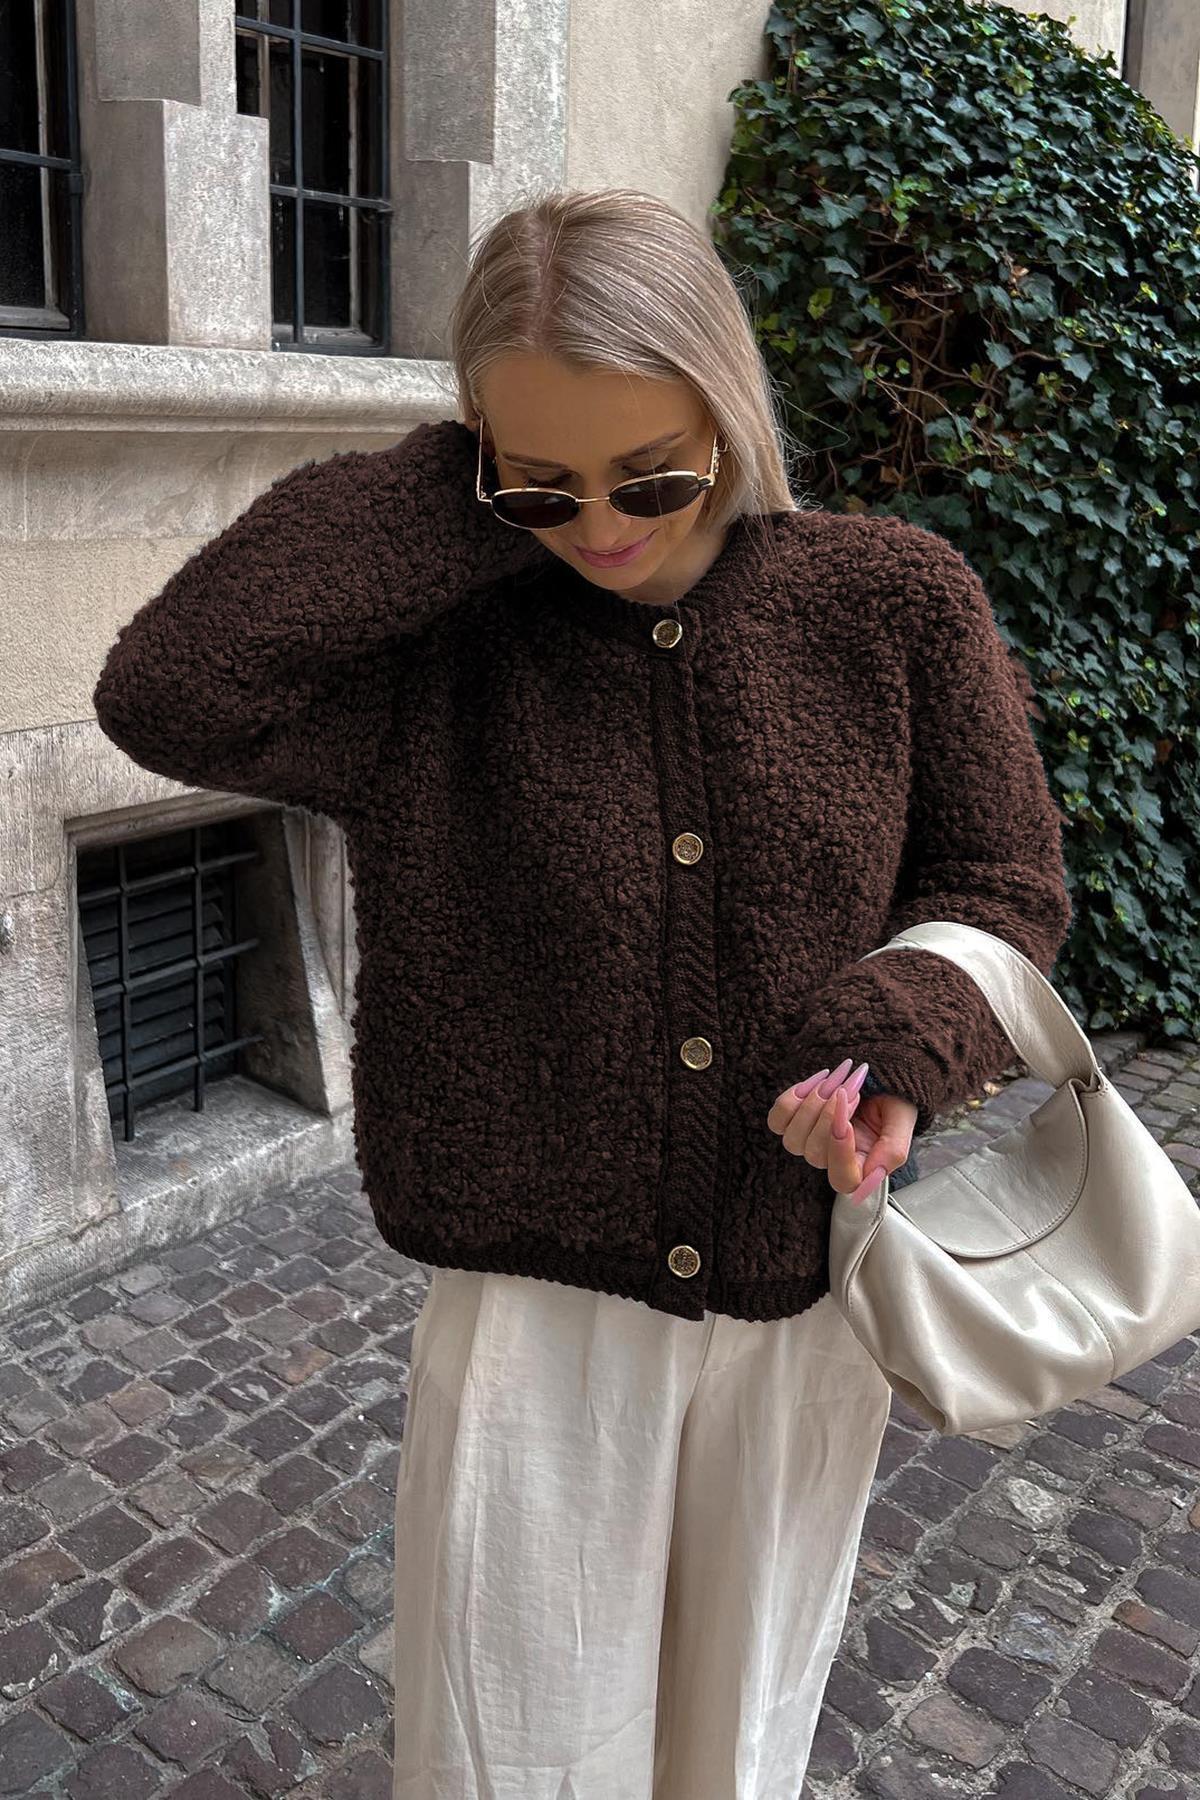 Madmext Brown Buttoned Boucle Knitwear Cardigan